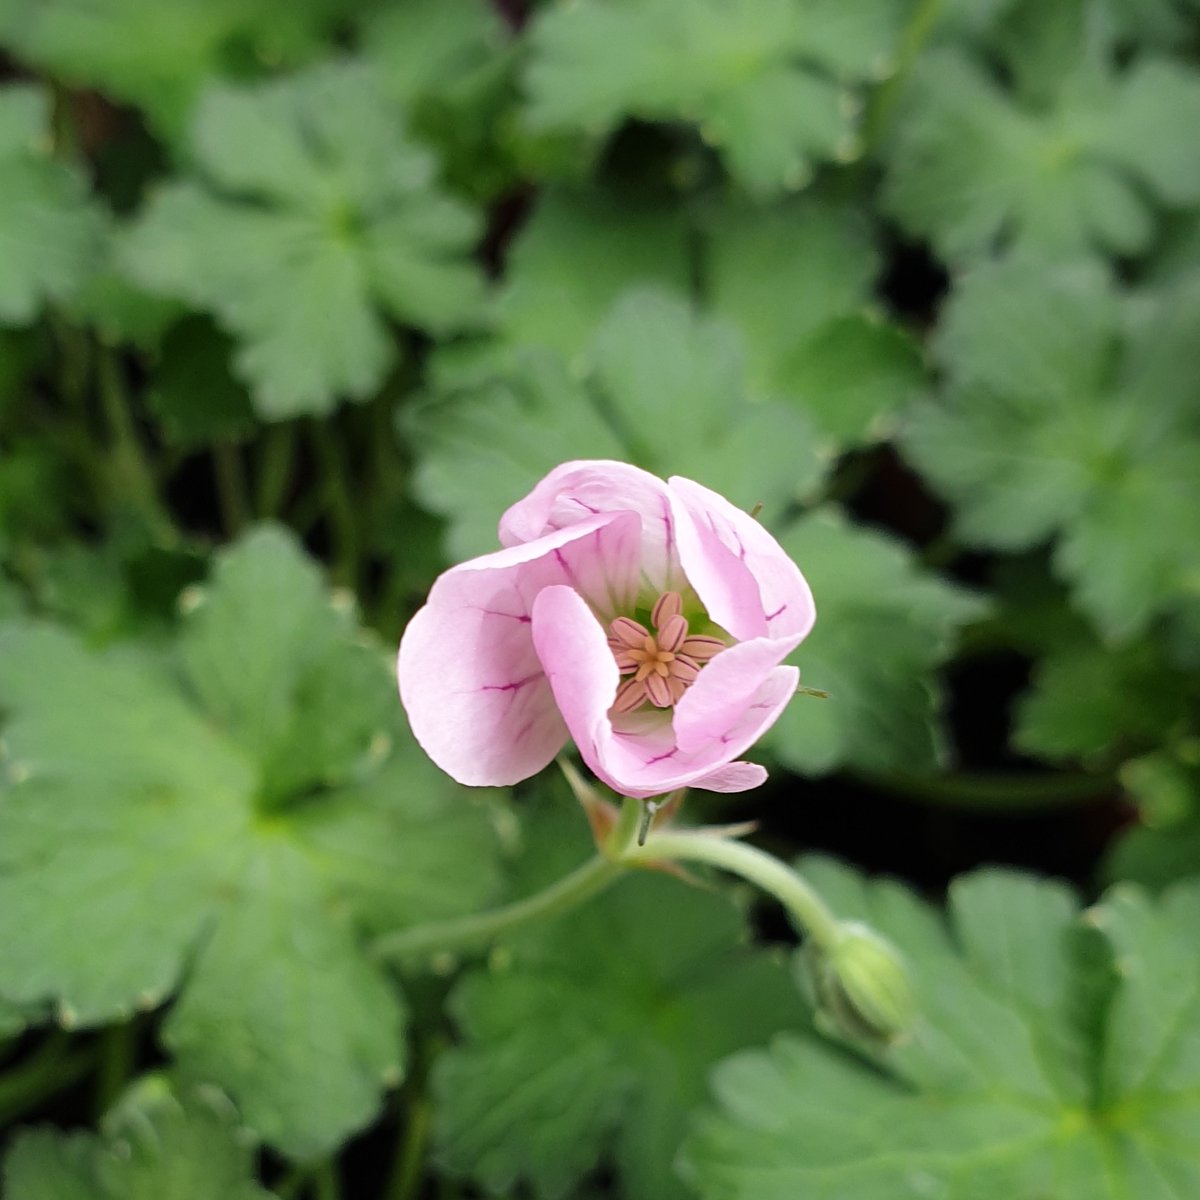 My Geranium Dreamland is beginning to flower. Just a few buds at the moment, but if other years are anything to go by, this will be a spectacular carpet of little pink flowers before long. #Geranium #GeraniumDreamland #flowers #gardening #gardens